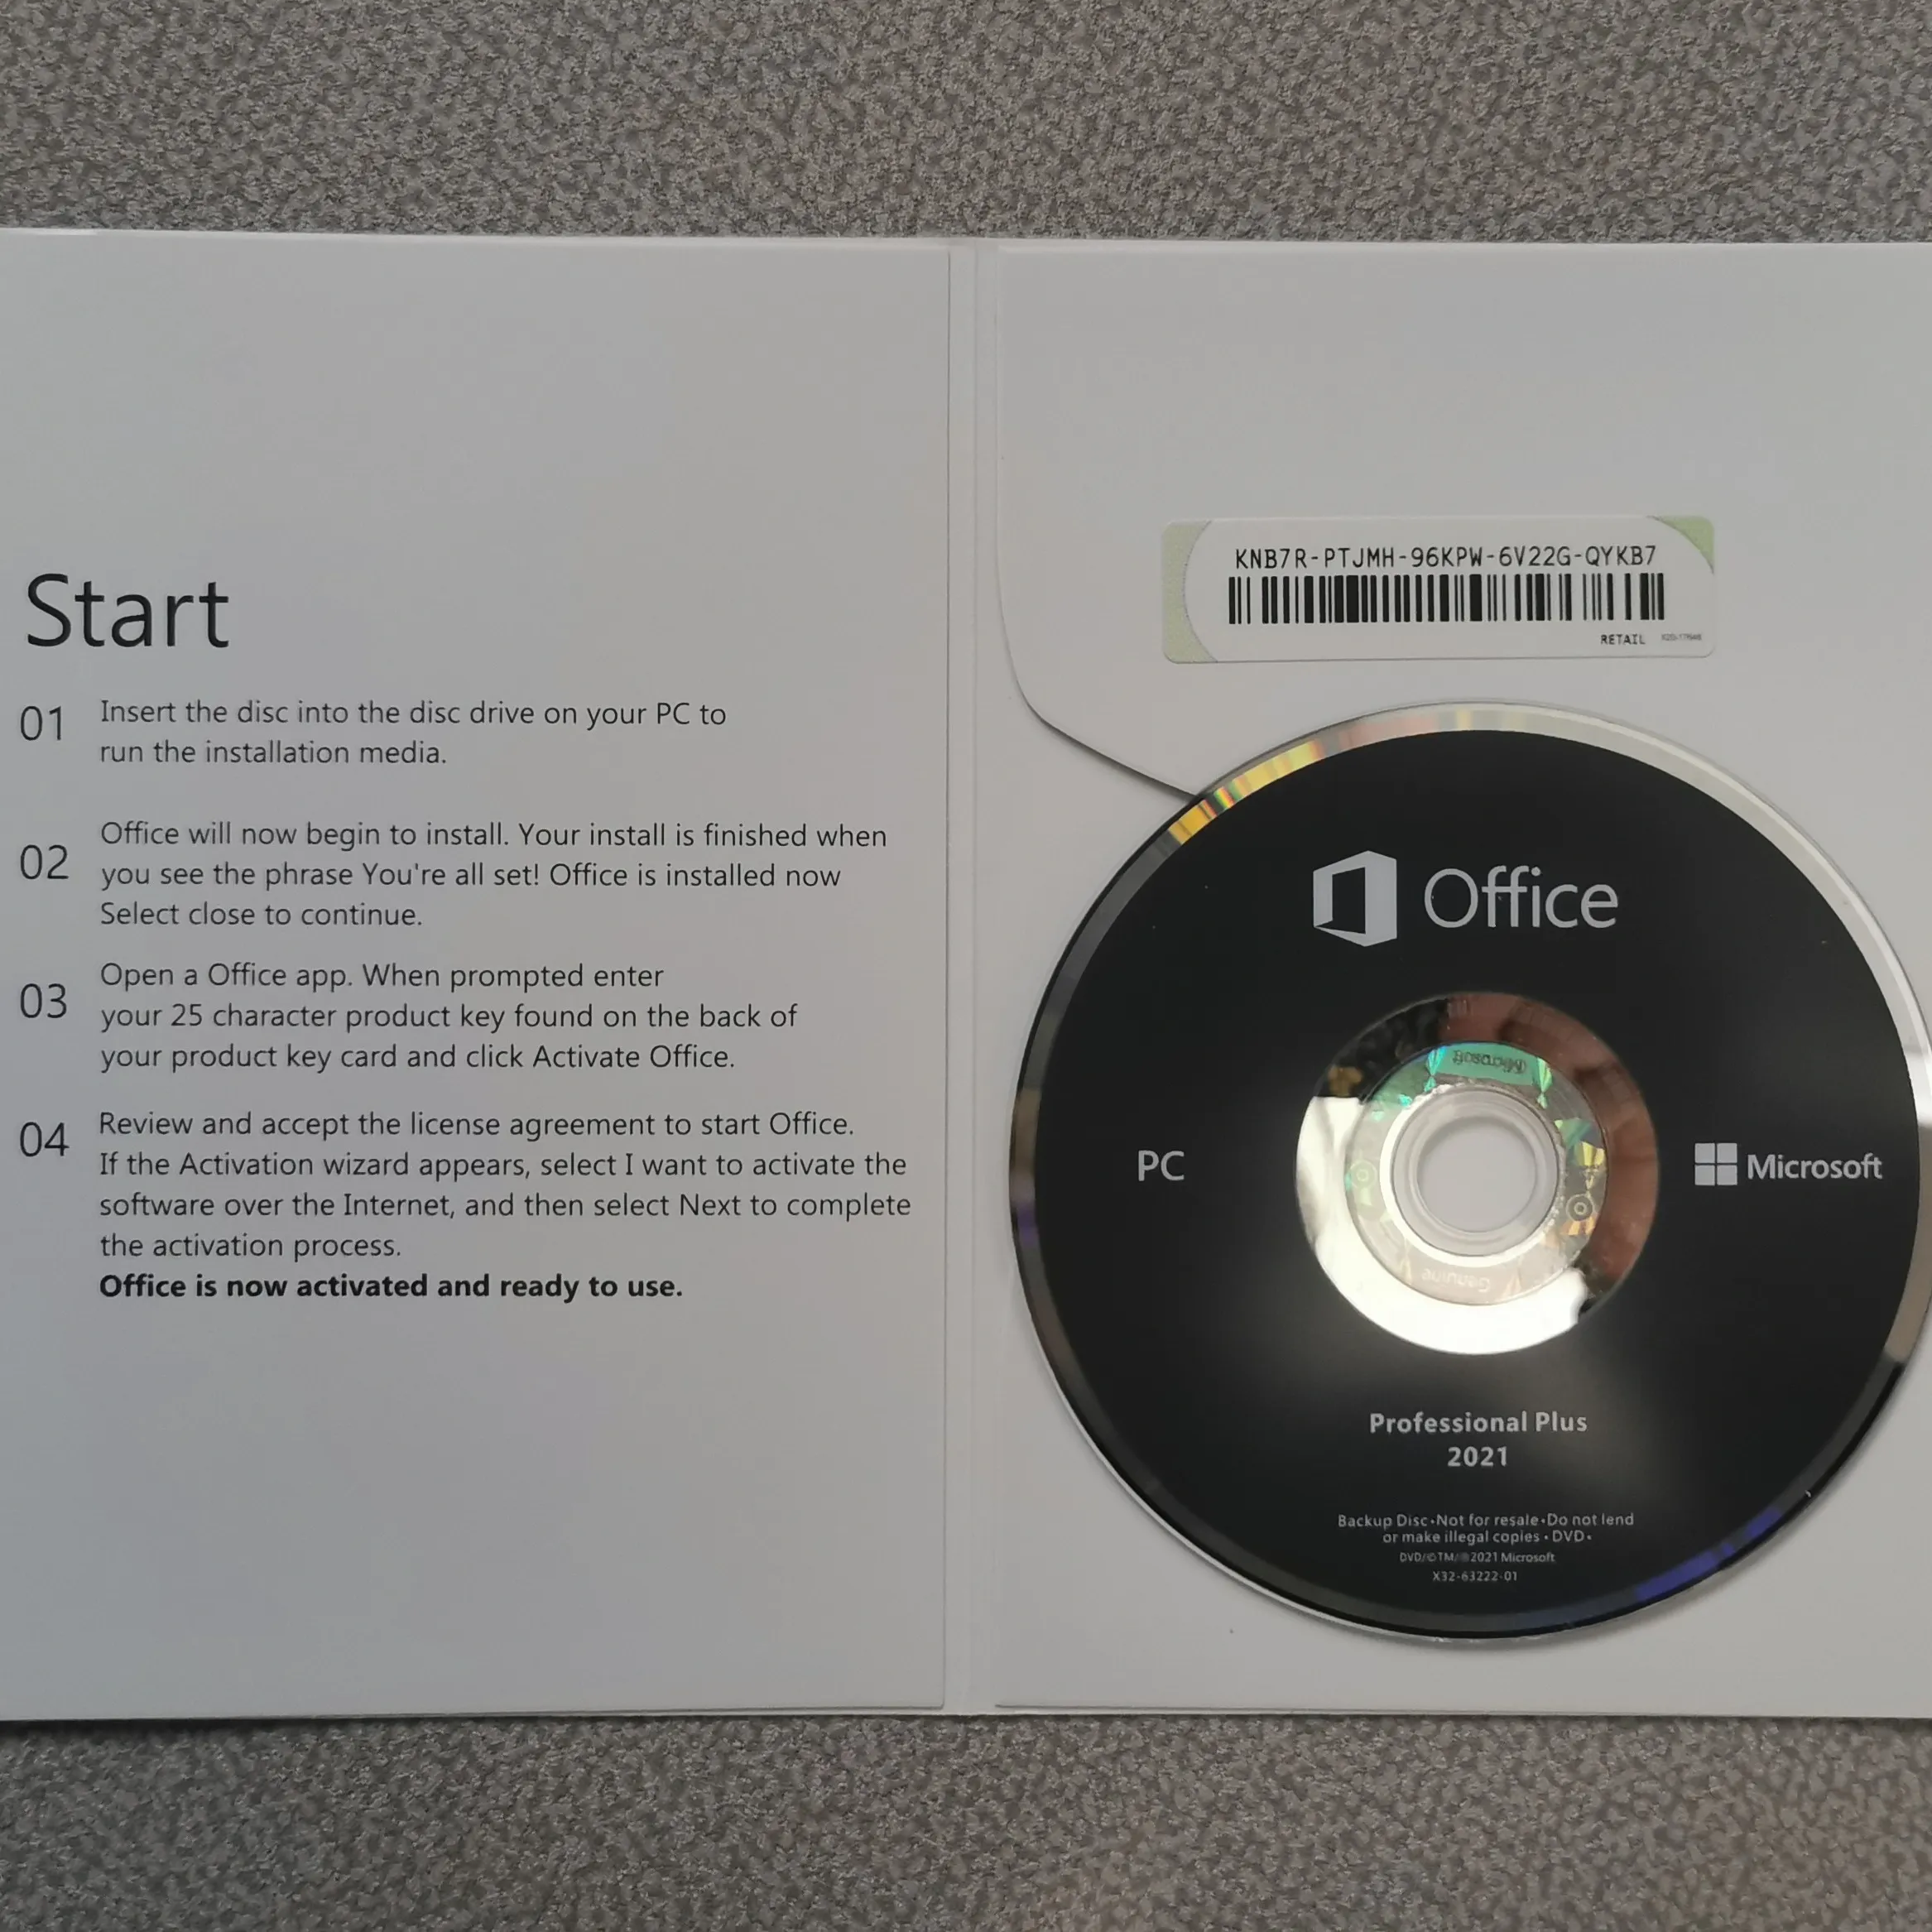 Office 2021 Professional Plus DVD Full Package with Free Shipping